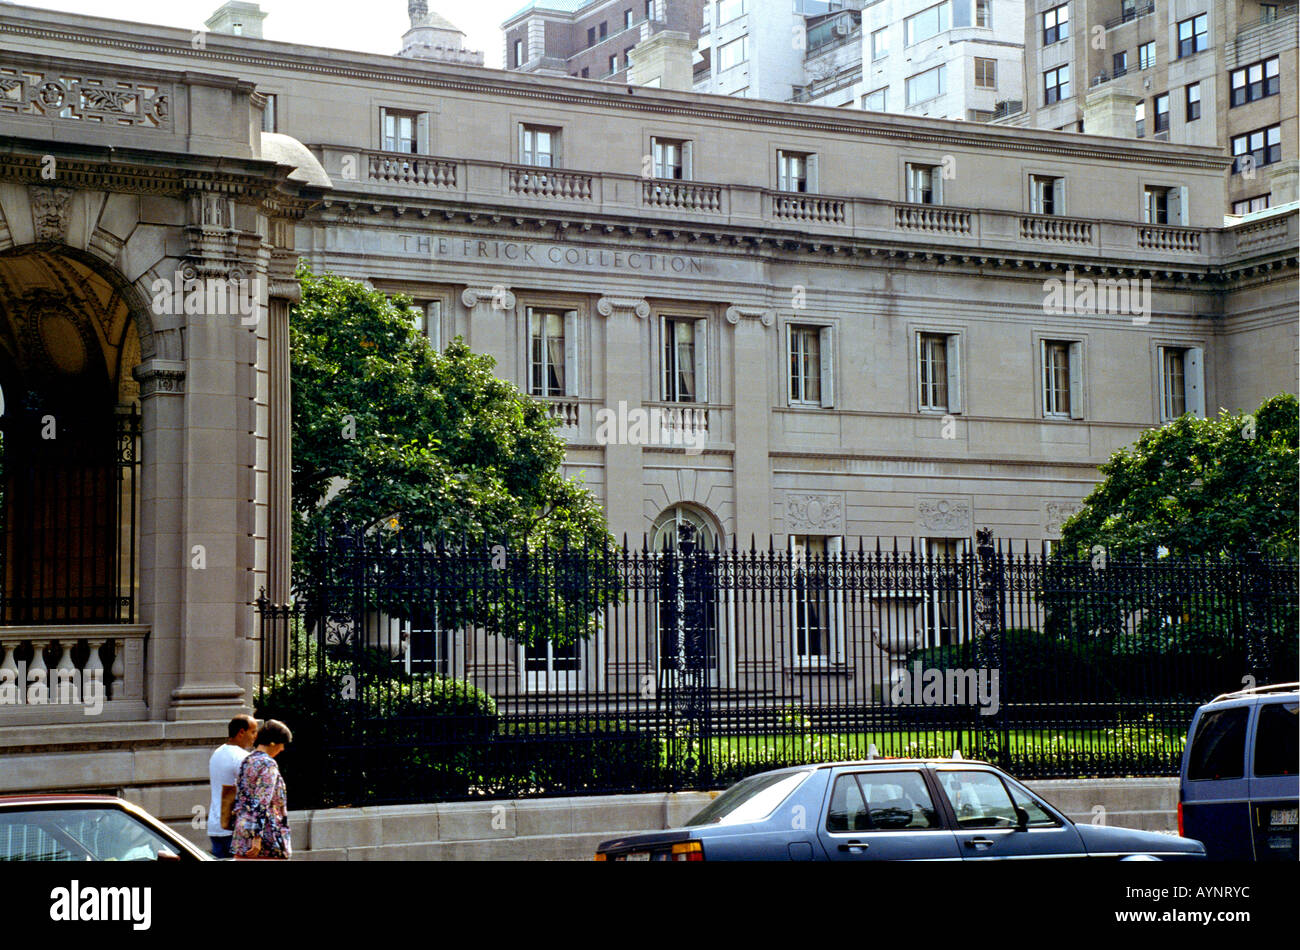 Cars parked in front of one of the city s residences the former home of industrialist Henry Clay Frick which is now a museum housing the Frick Collection Stock Photo